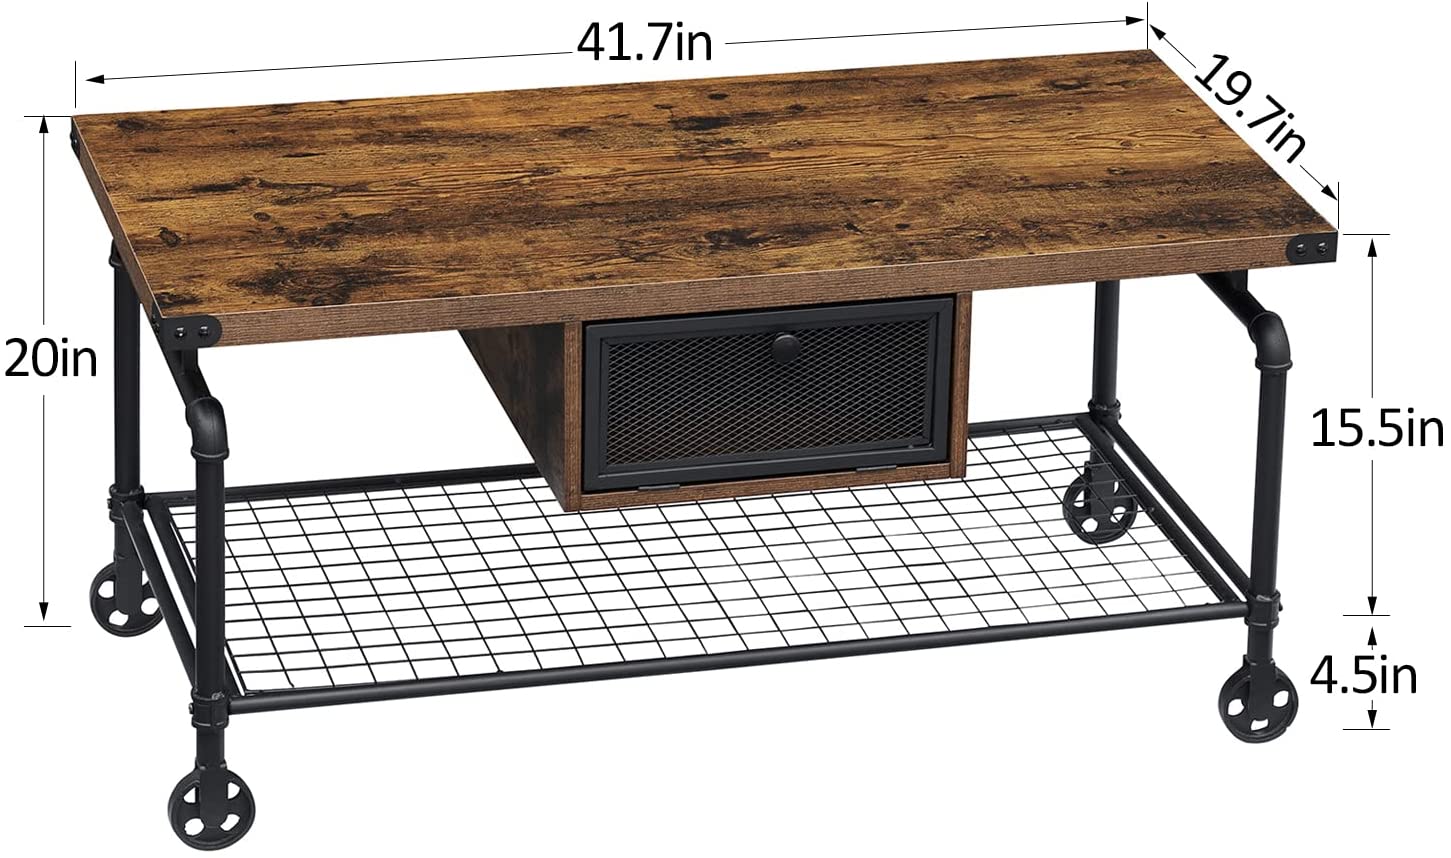 Industrial Coffee Sofa Table with Storage Shelves and Drawer